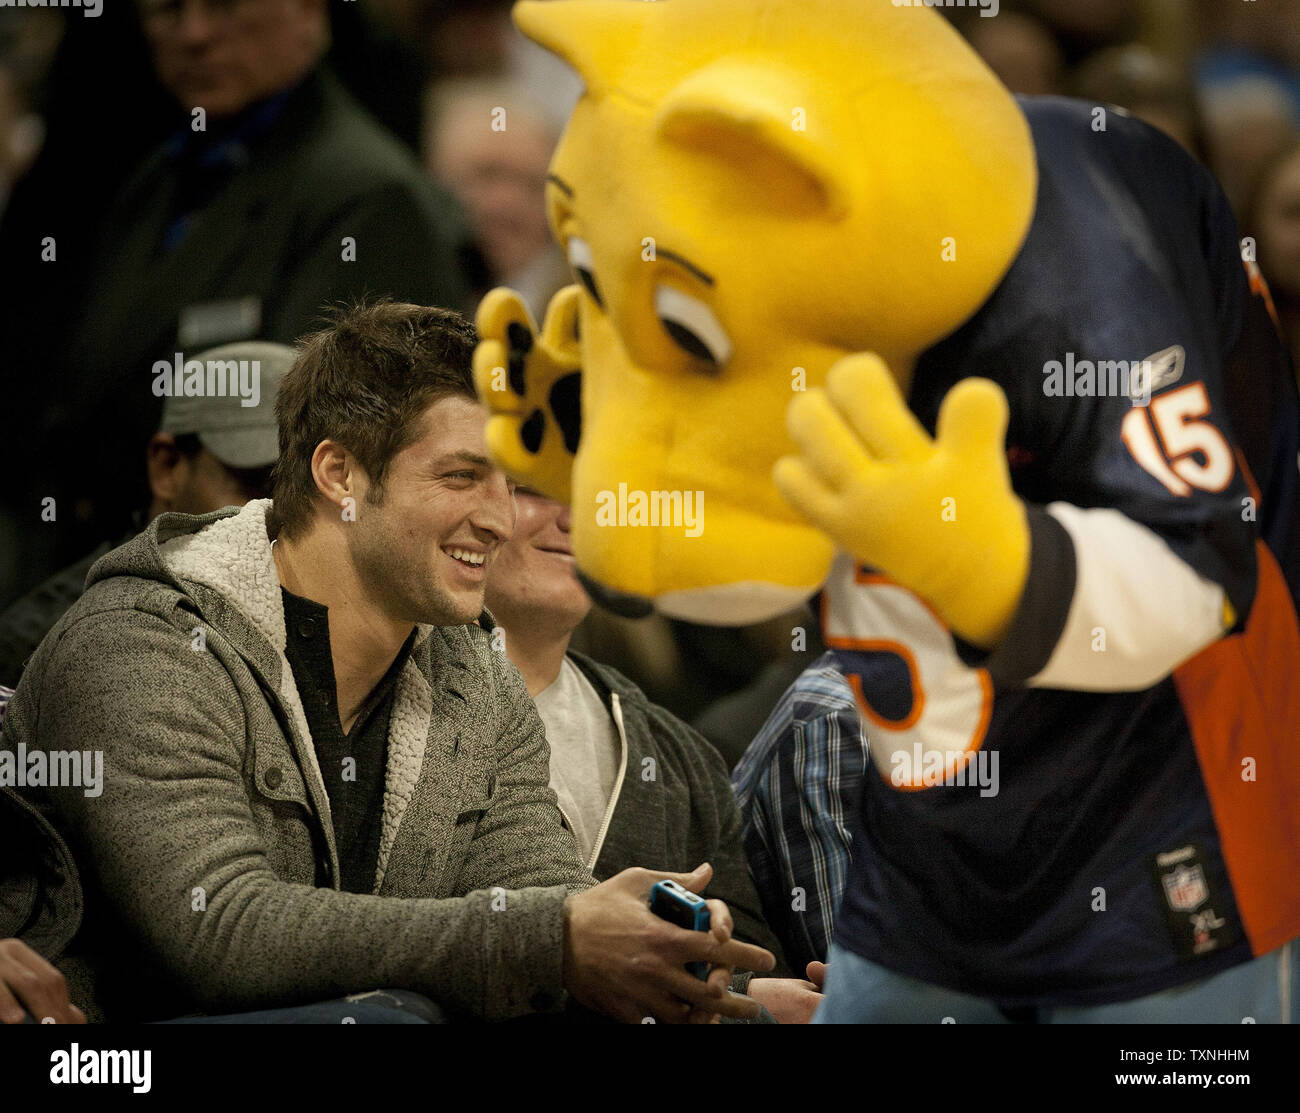 Denver Broncos quarterback Tim Tebow smiles after the Denver Nuggets mascot Rocky attempted half court shots in a Tebow jersey at the Pepsi Center on January 29, 2012 in Denver.   The Los Angeles Clippers battled to a 109-105 win over the Denver  Nuggets.     UPI/Gary C. Caskey Stock Photo